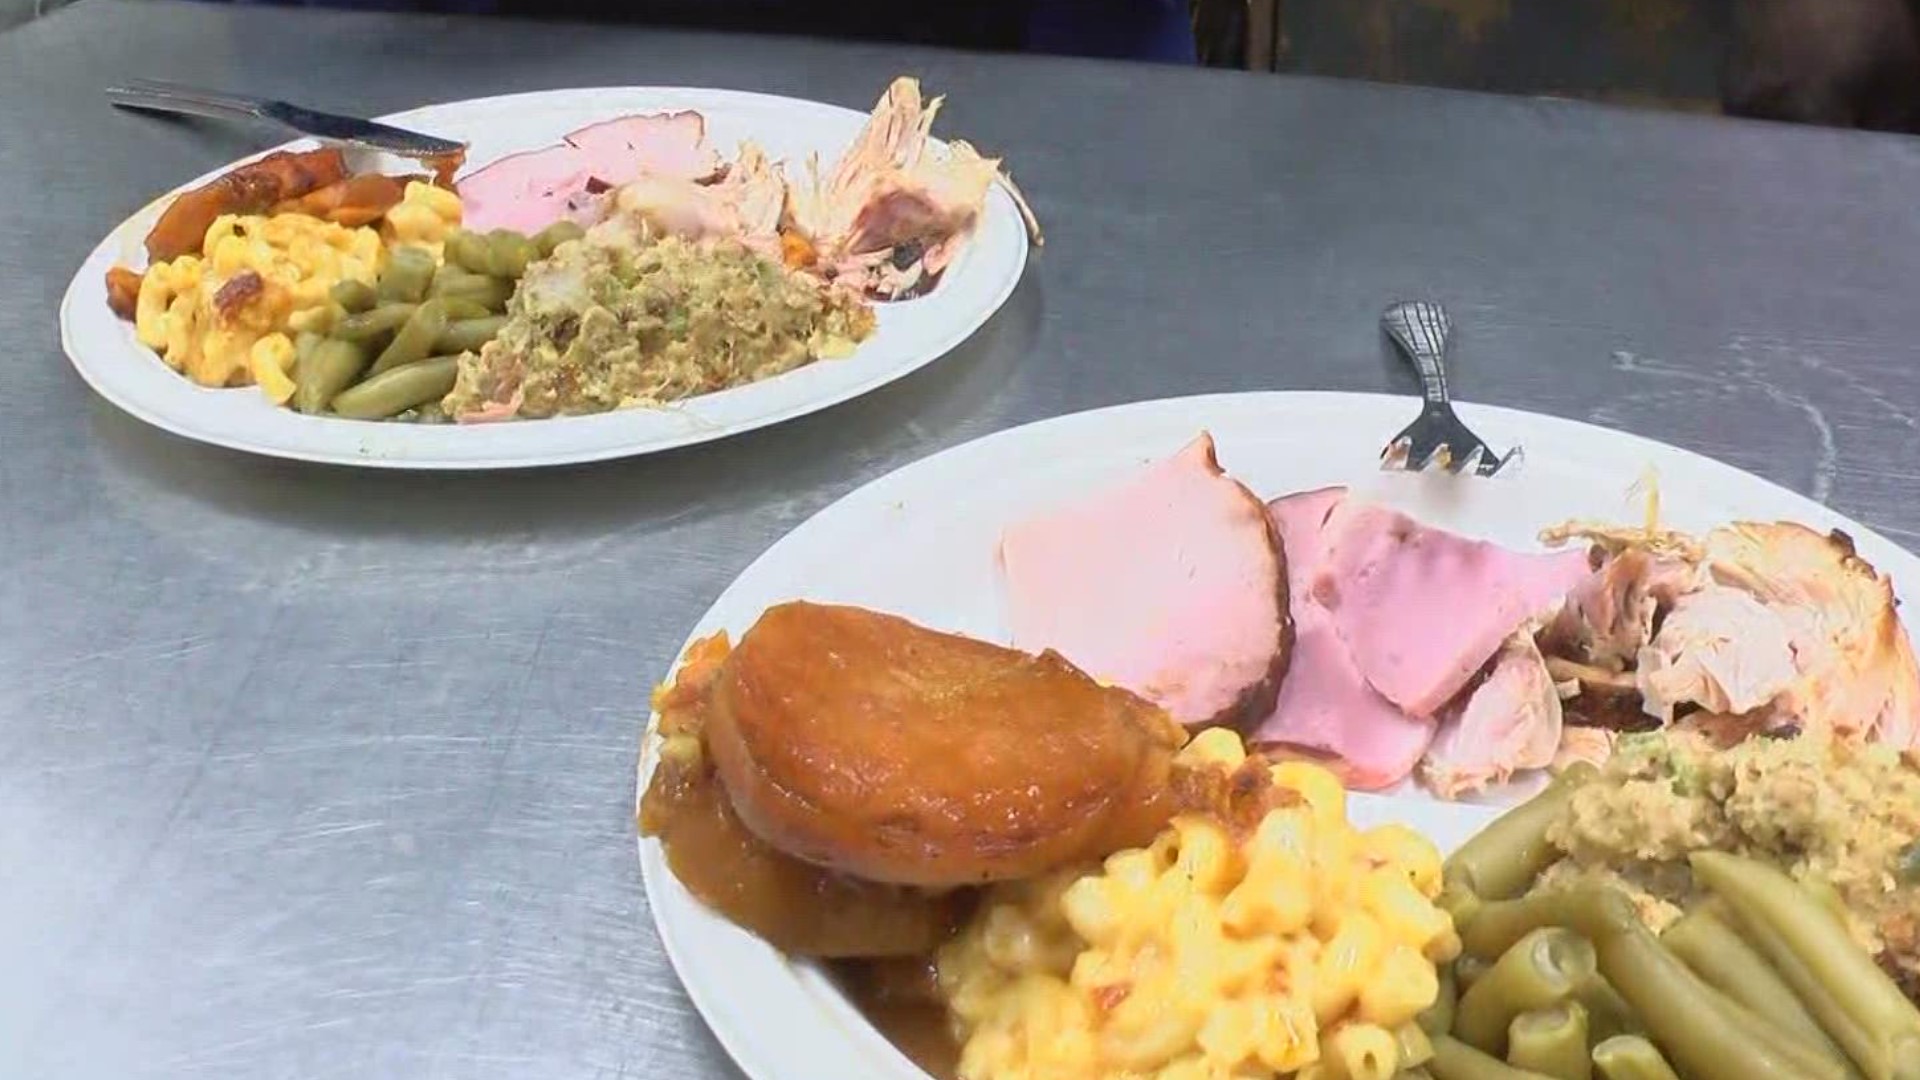 Keith Henry, the owner of O'Henrys Kitchen OnWheels, is cooking for those in need of a holiday dinner. He expects to serve 1,500 free meals Thursday.